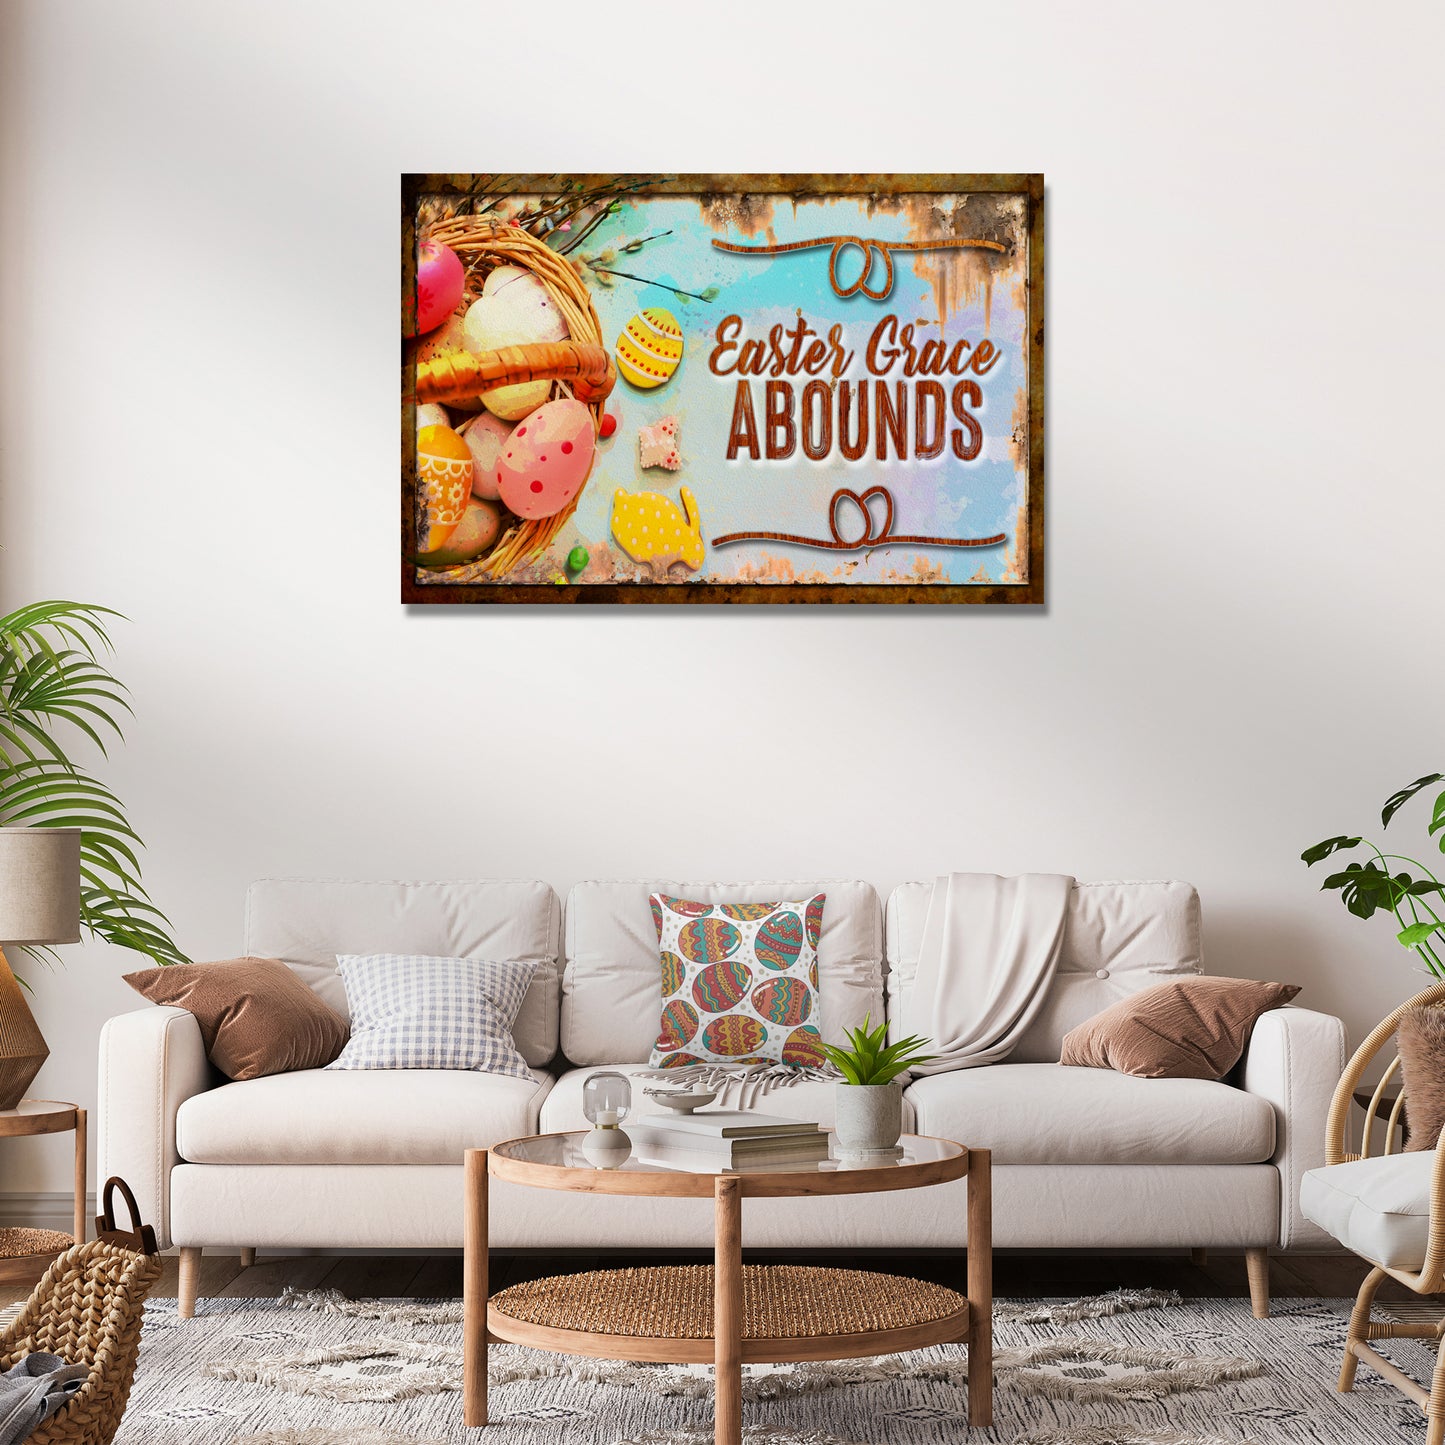 Easter Grace Abounds Sign - Image by Tailored Canvases